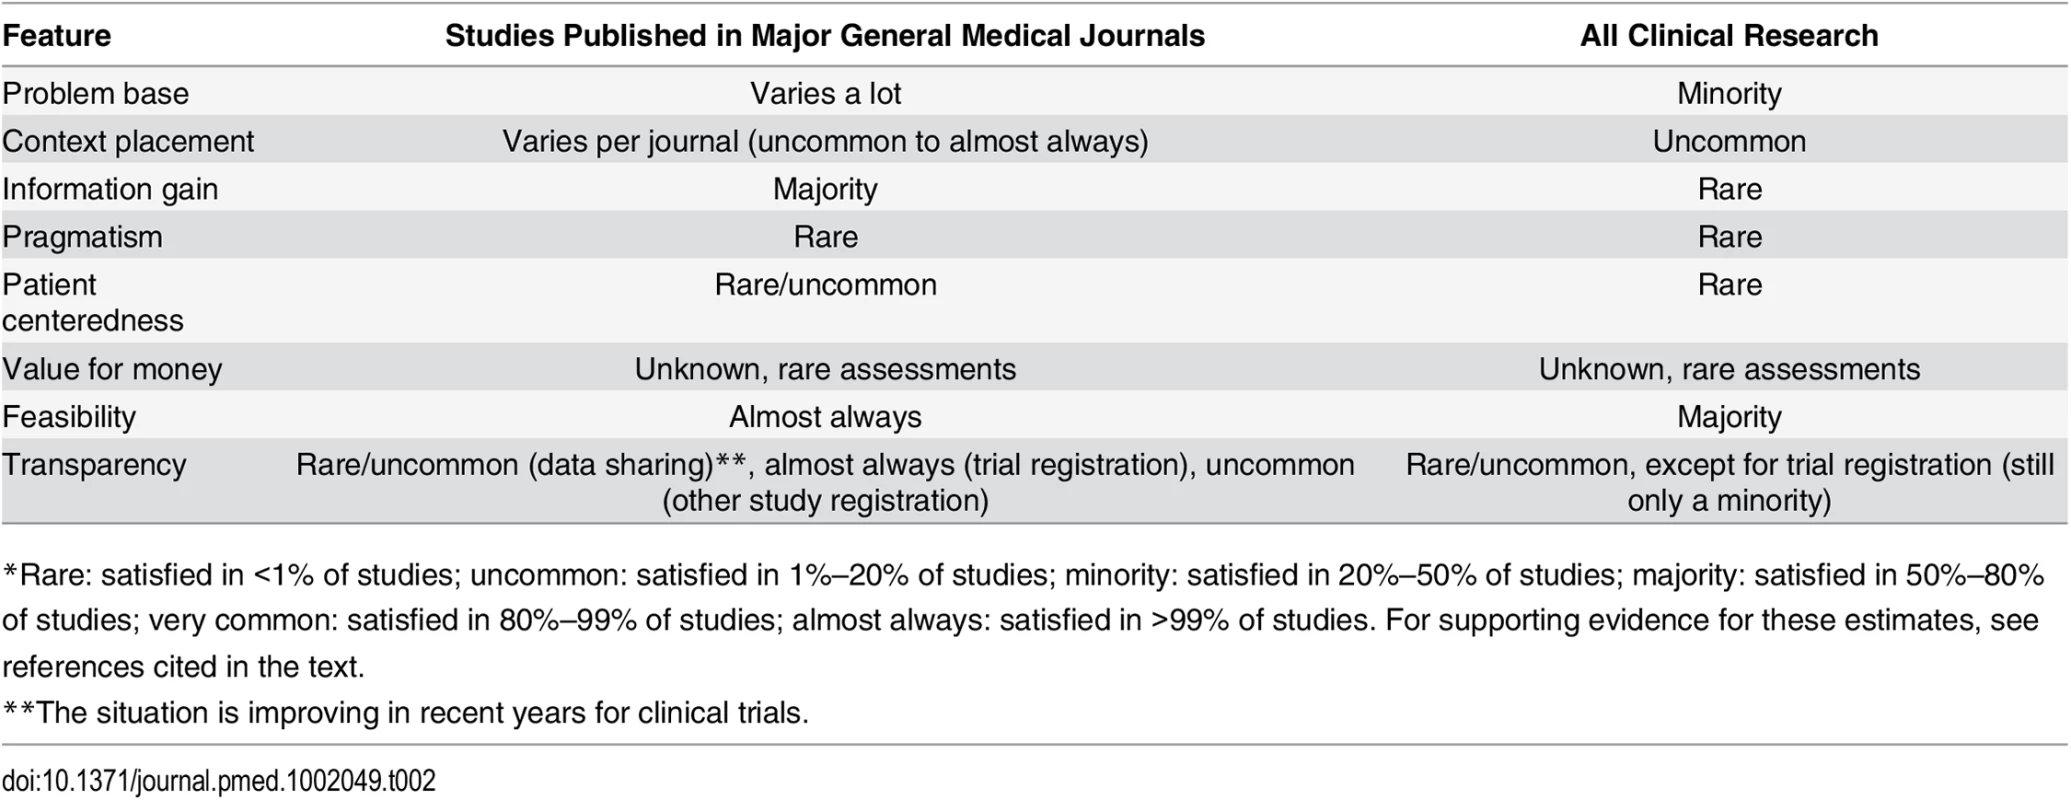 How often is each utility feature satisfied in studies published in major general medical journals and across all clinical research?<em class=&quot;ref&quot;>*</em>